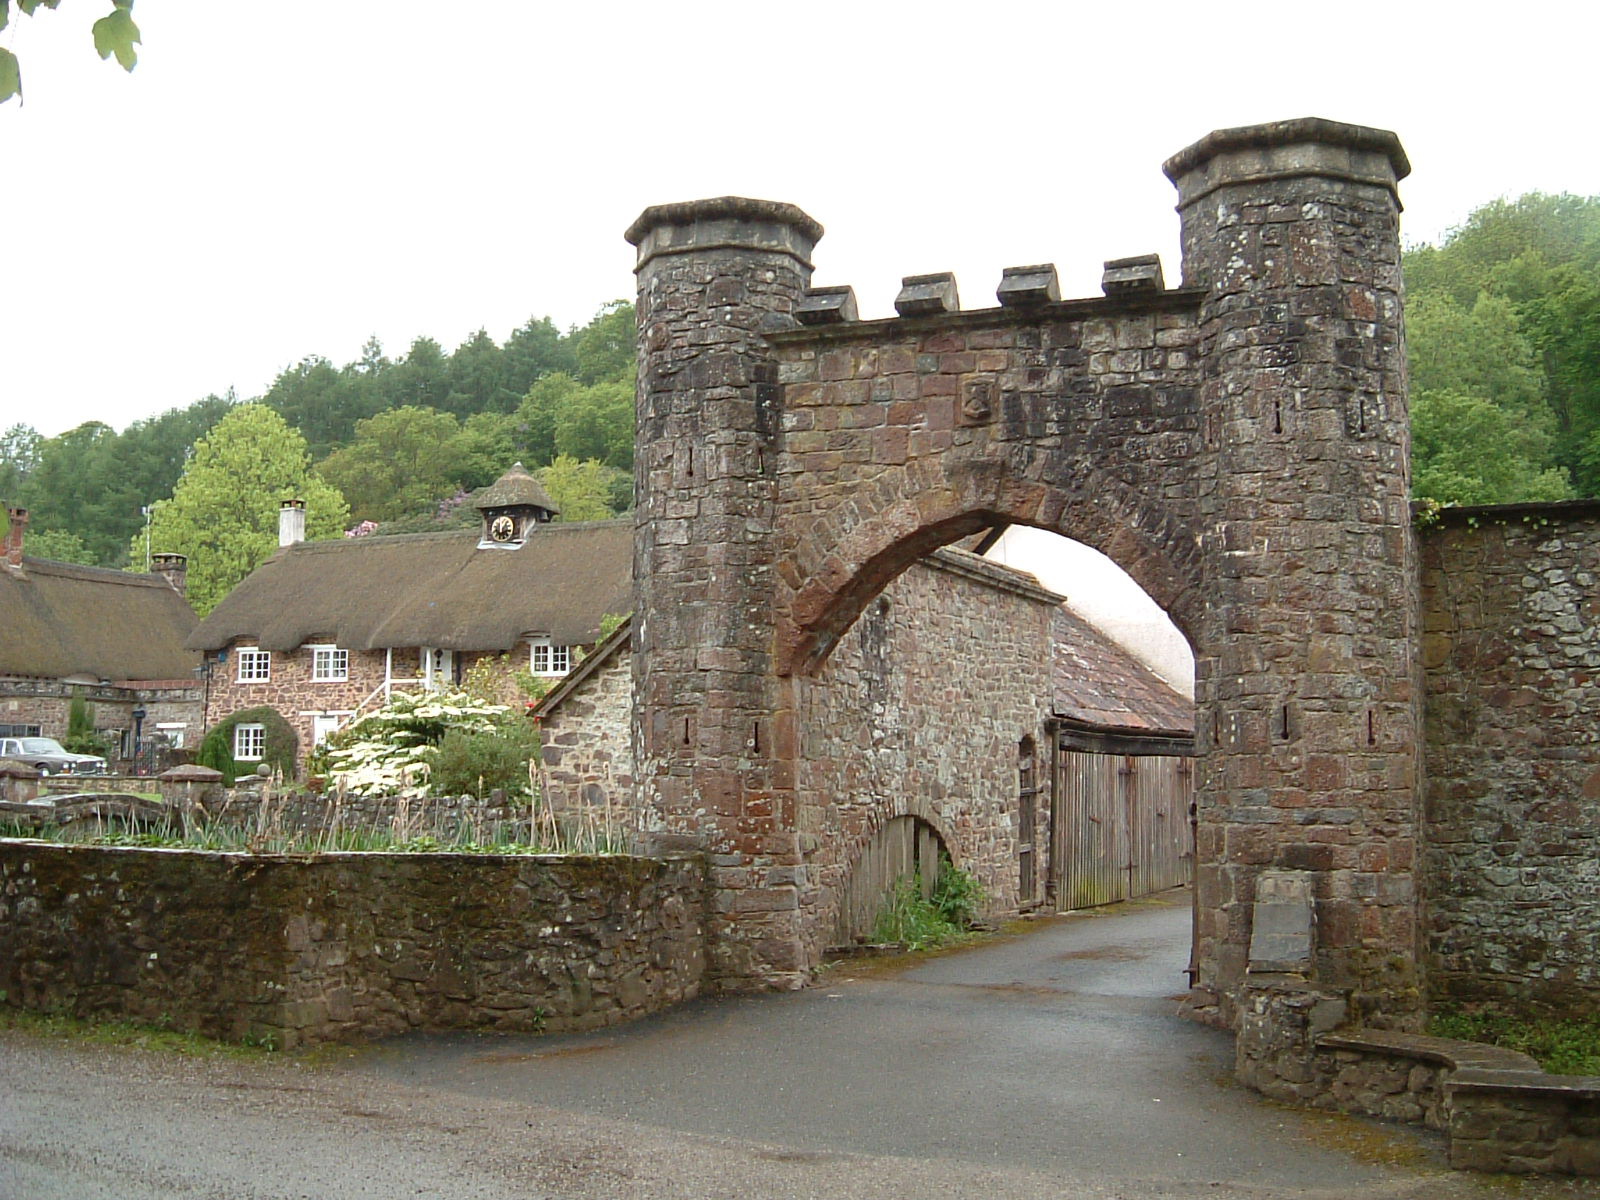 The entrance gate to Bickleigh Castle